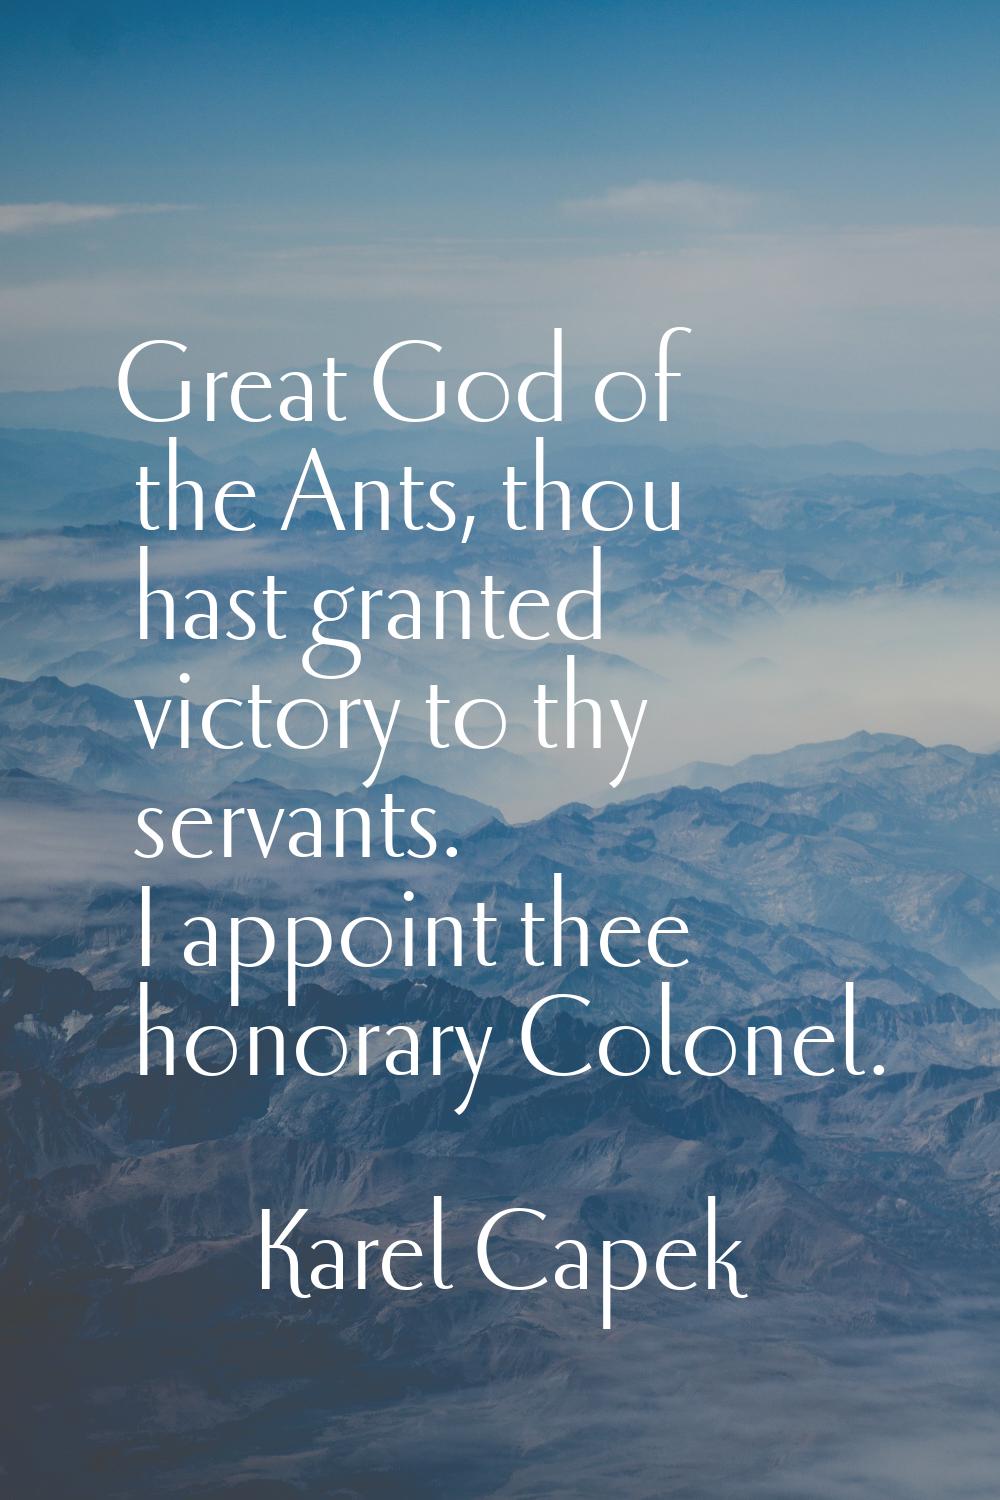 Great God of the Ants, thou hast granted victory to thy servants. I appoint thee honorary Colonel.